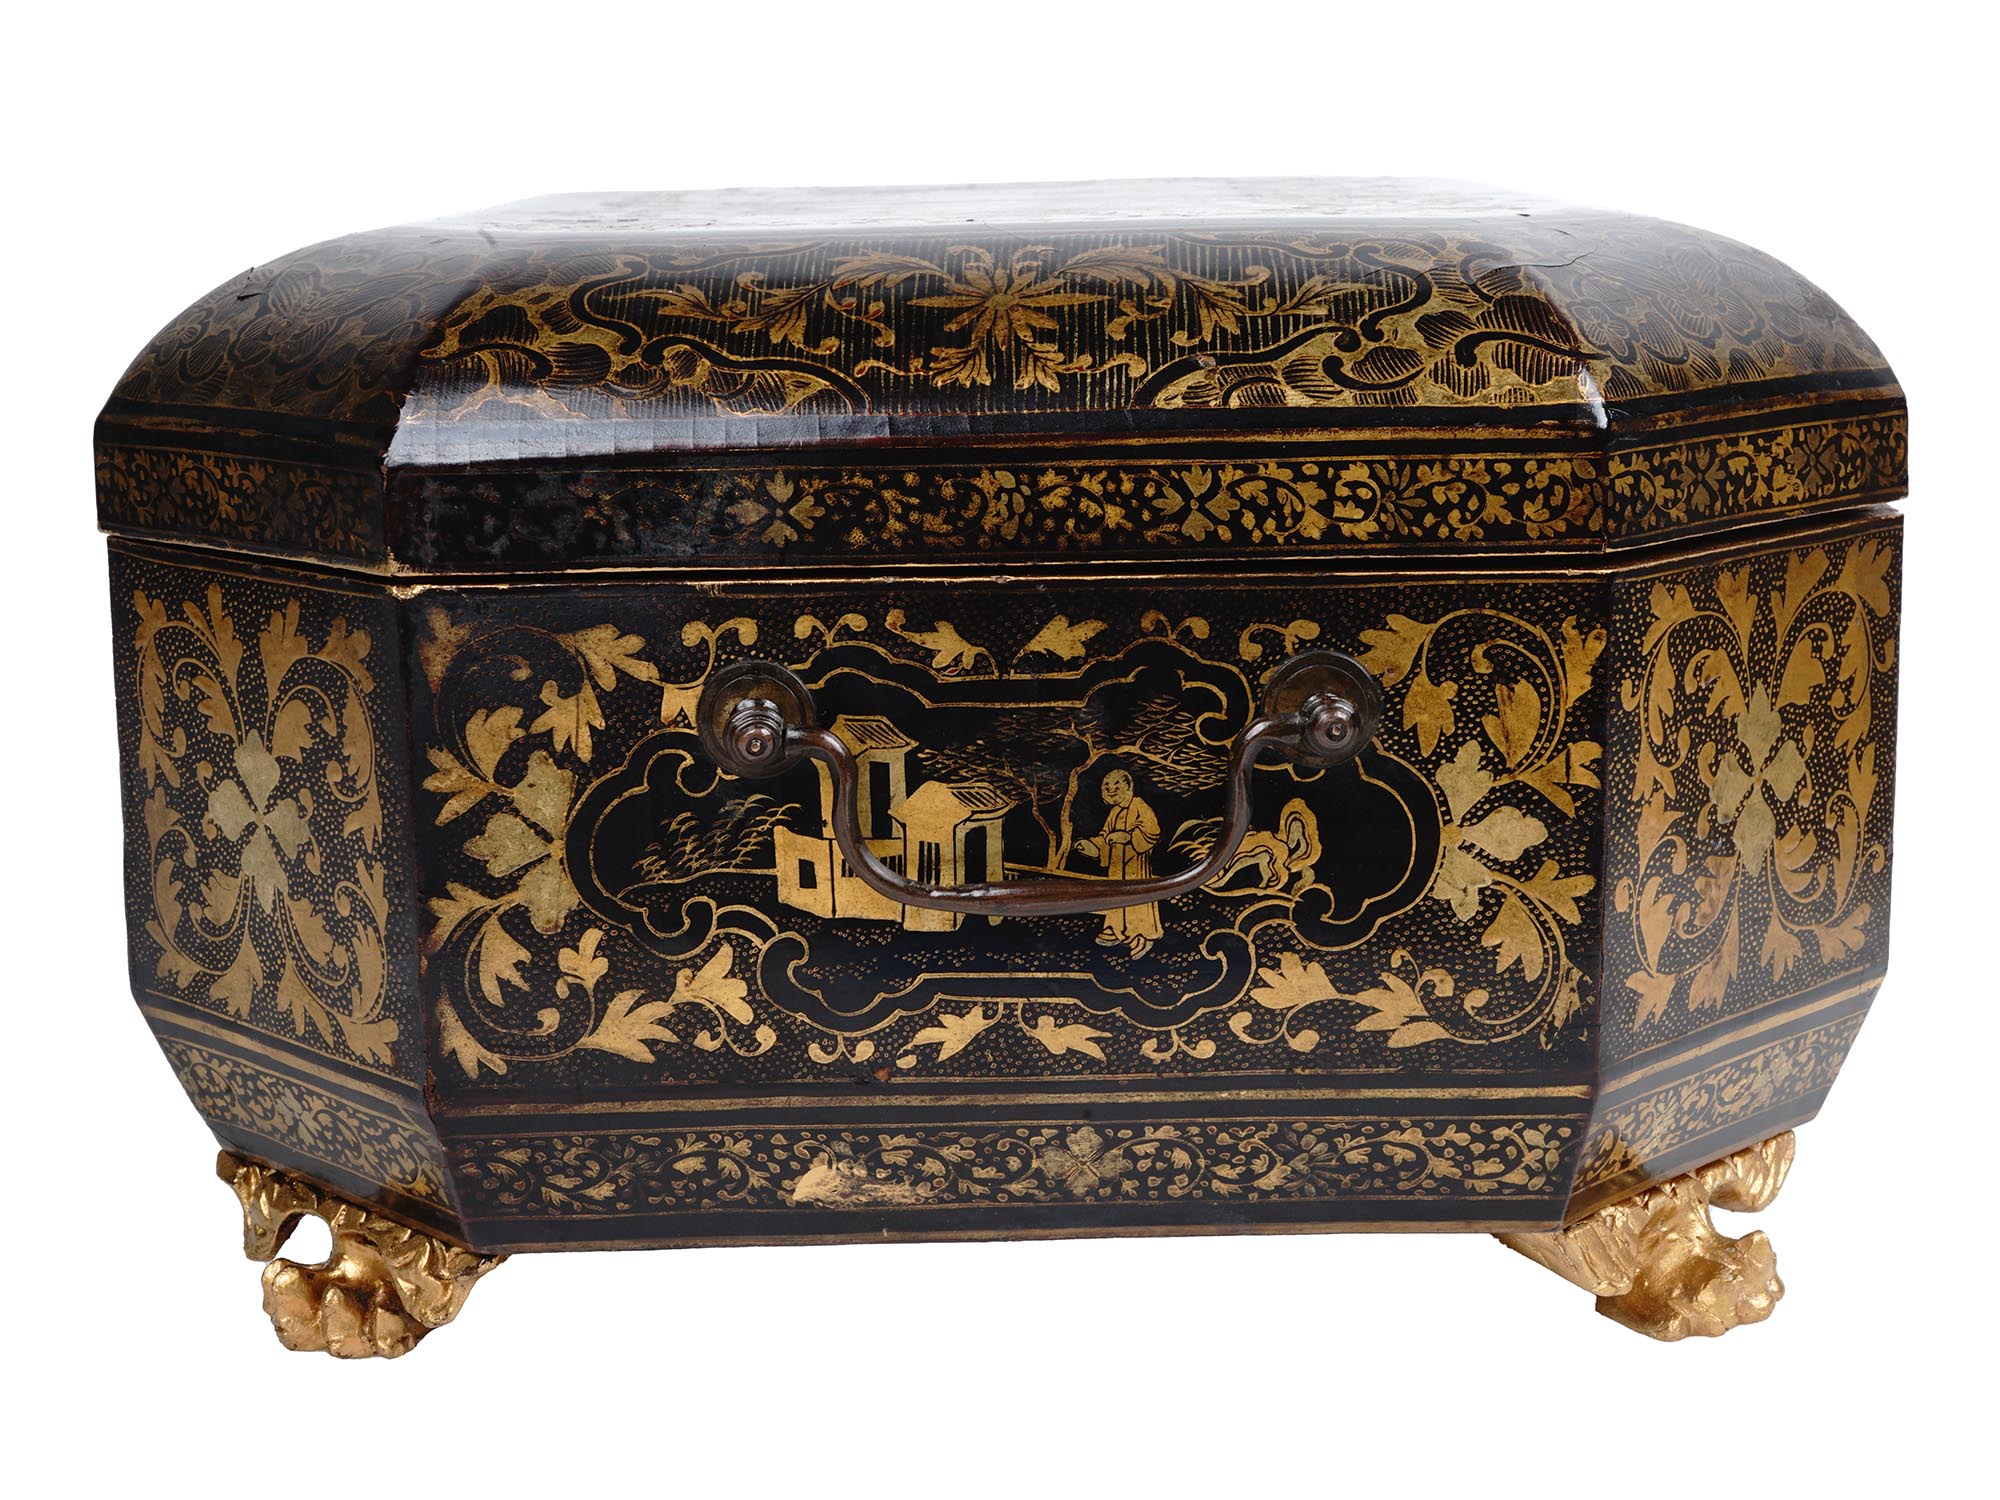 ANTIQUE CHINESE LACQUERED AND GILT DECORATED BOX PIC-2